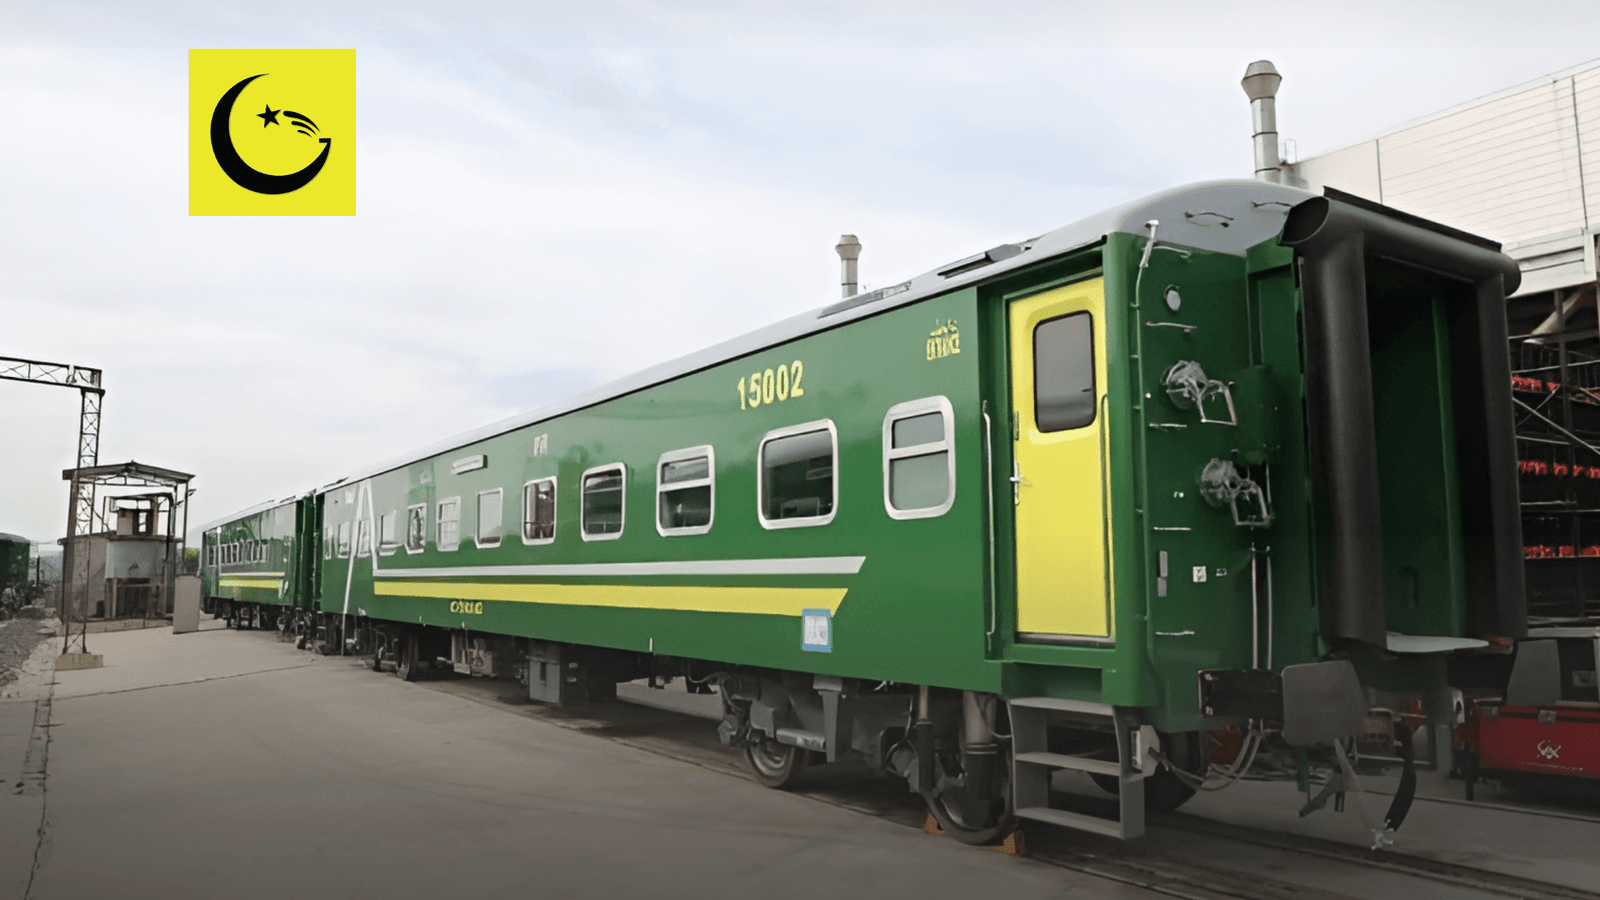 Pakistan Railways receives 70 new coaches from China to enhance operations - Good News Pakistan